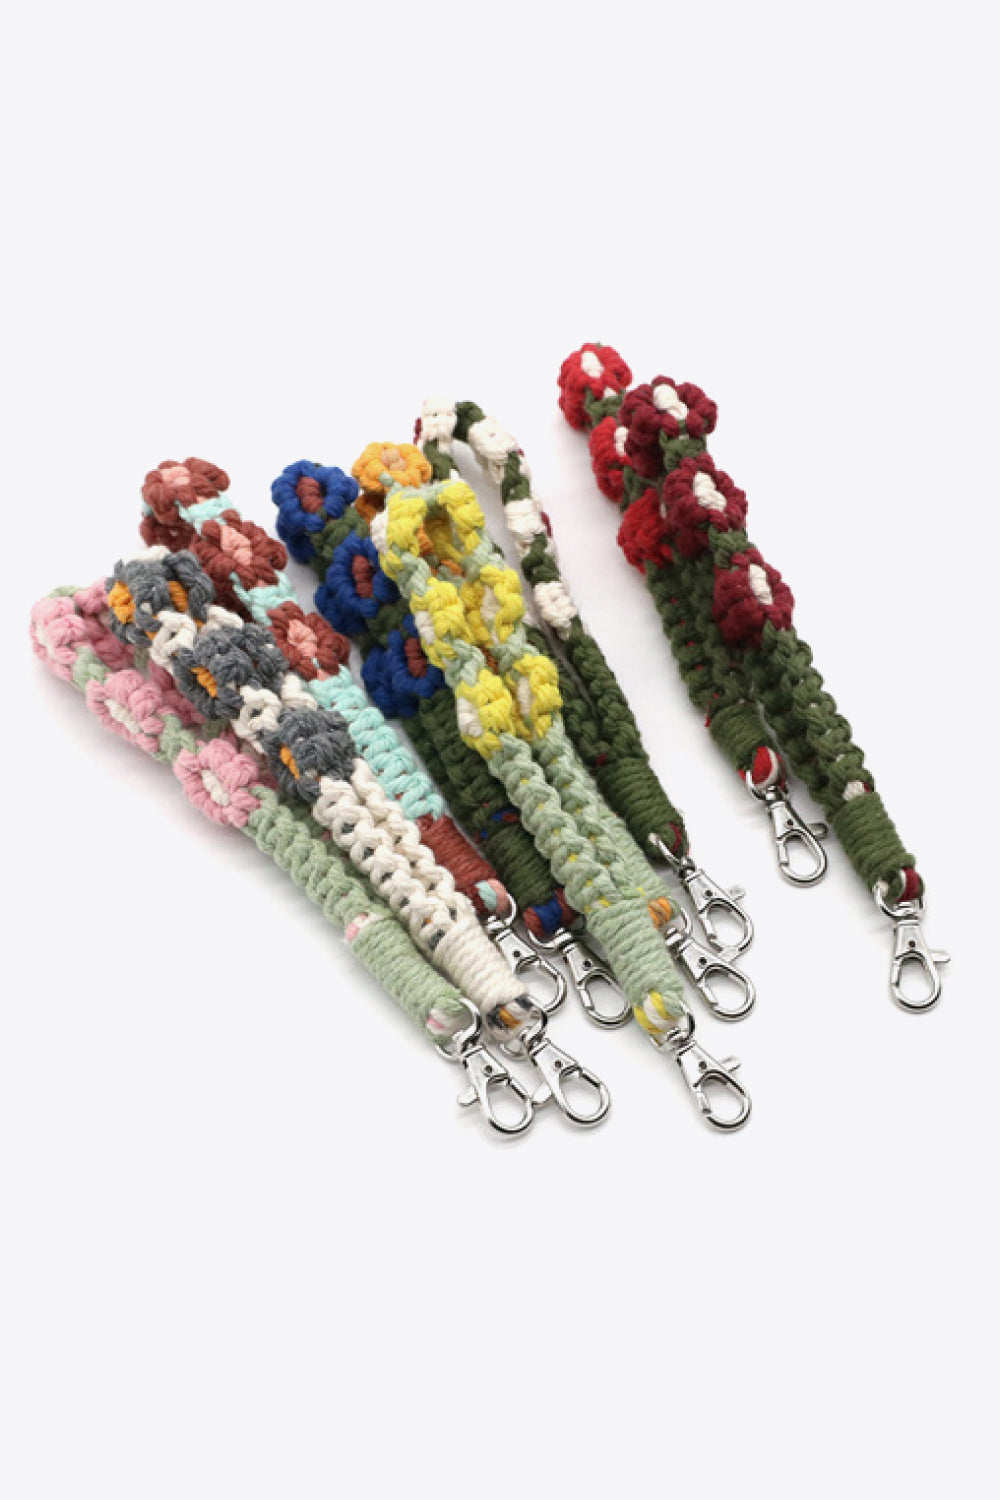 Trendsi Cupid Beauty Supplies Keychains 4-Pack Hand-Woven Flower Macrame Wristlet Keychain, Color Varies